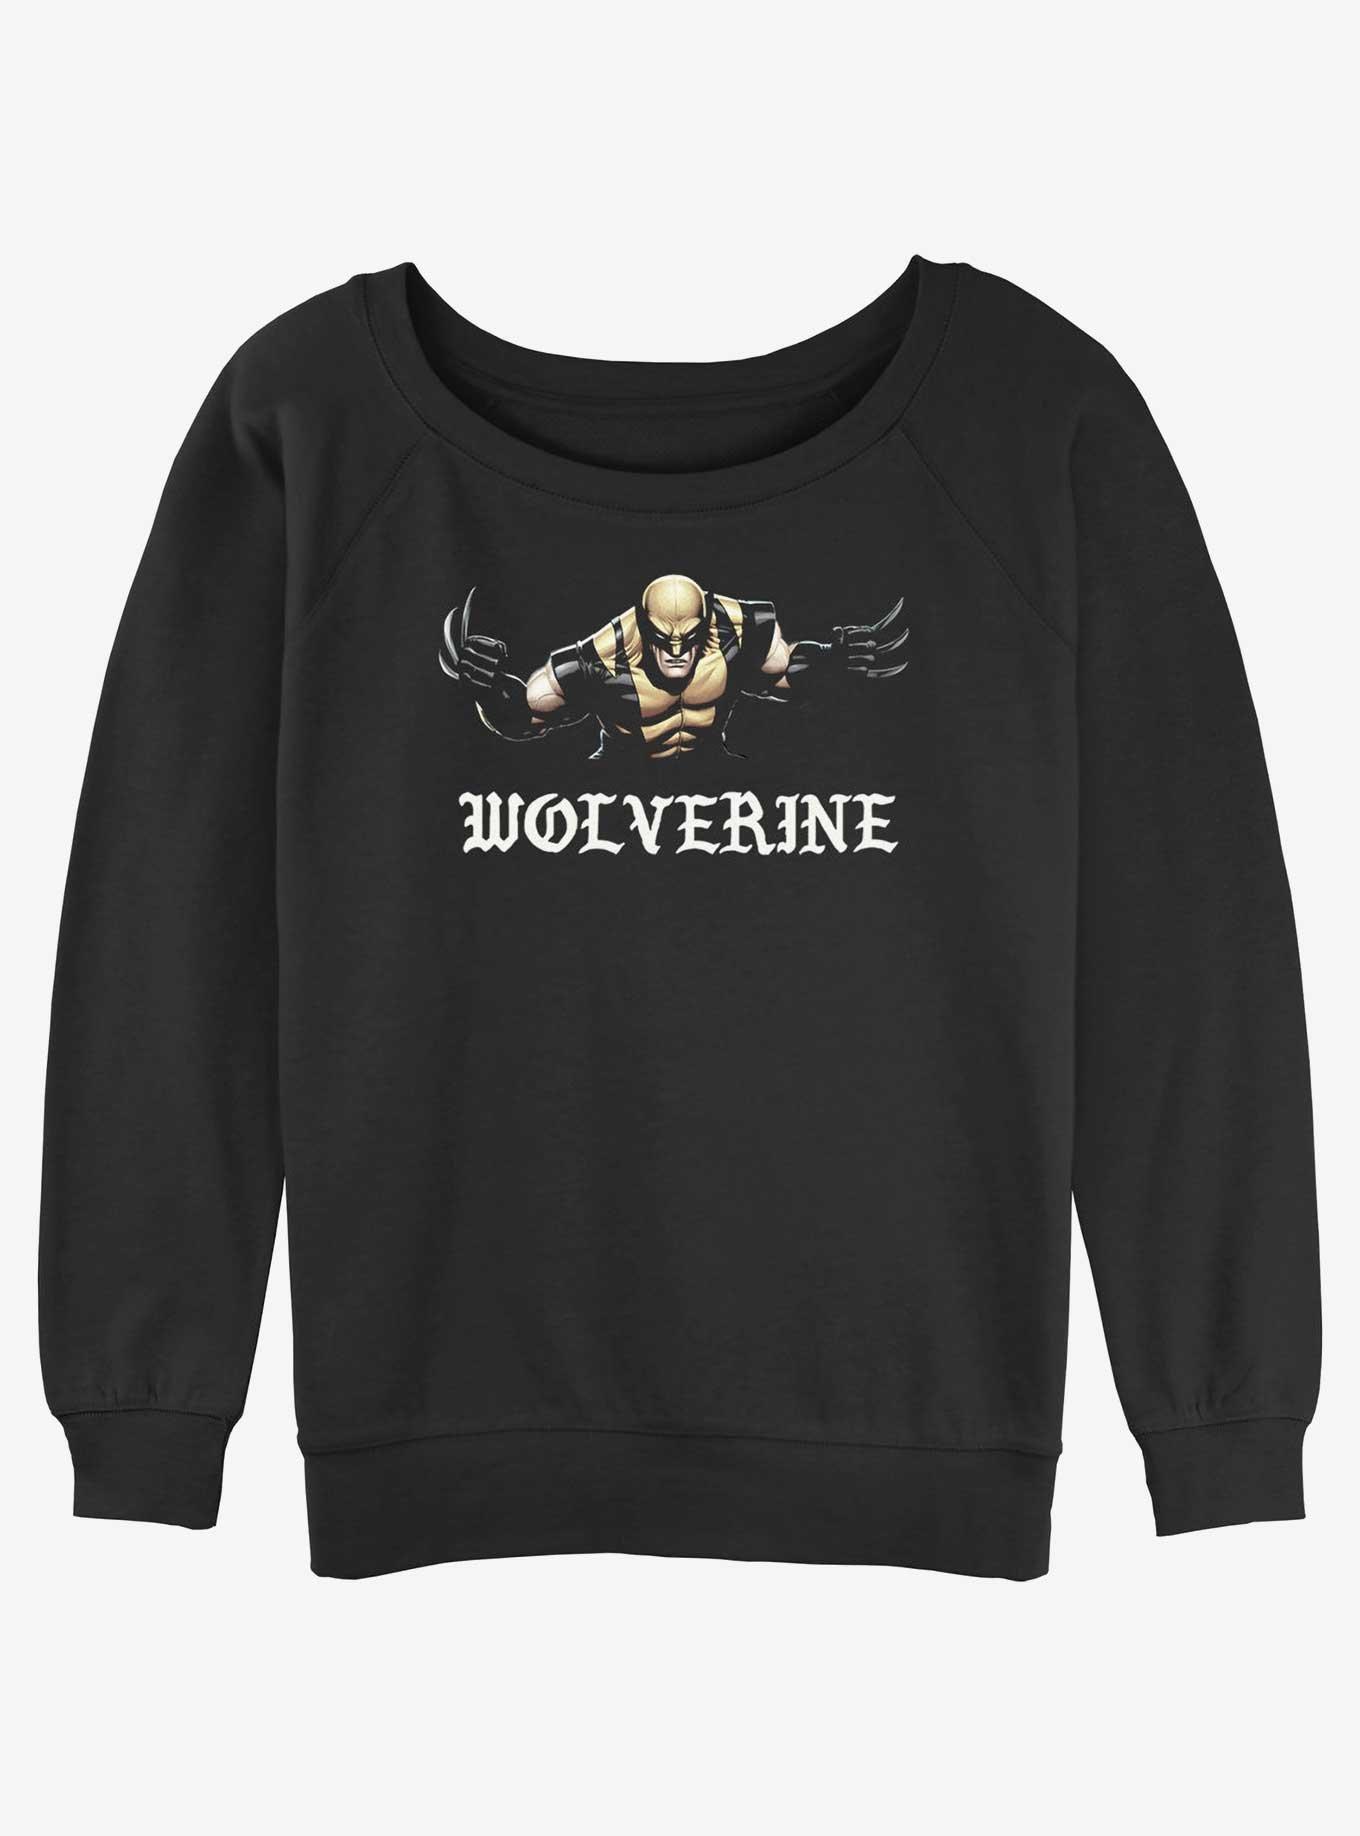 Wolverine Punch With Blades Womens Slouchy Sweatshirt, BLACK, hi-res